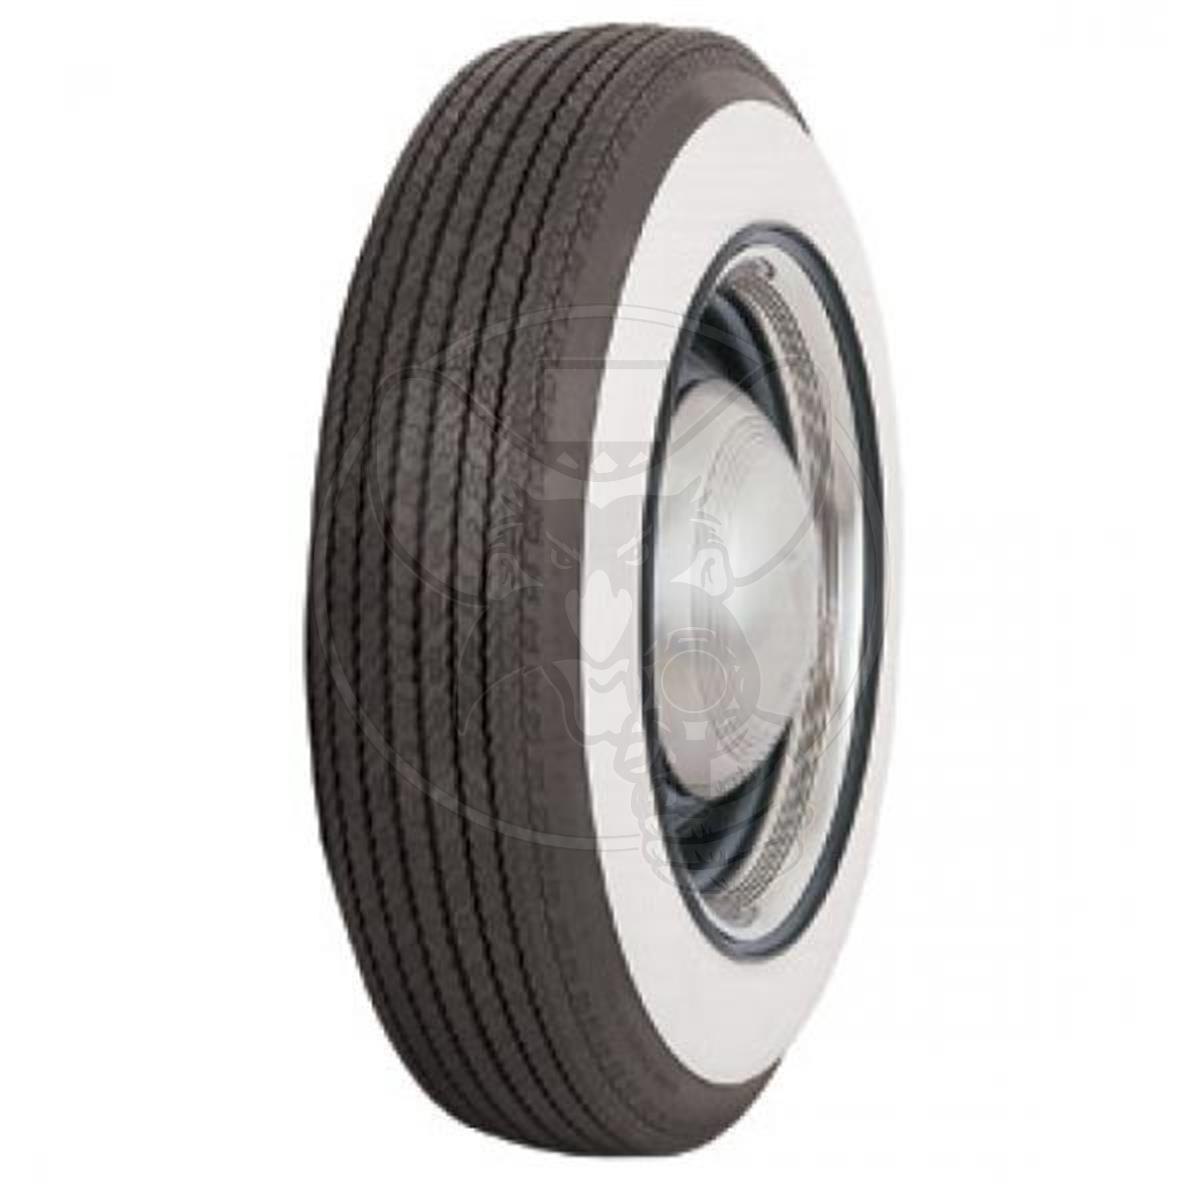 COKER CALSSIC BIAS PLY TYRE 560-15 WITH 2-3/4"  WHITEWALL